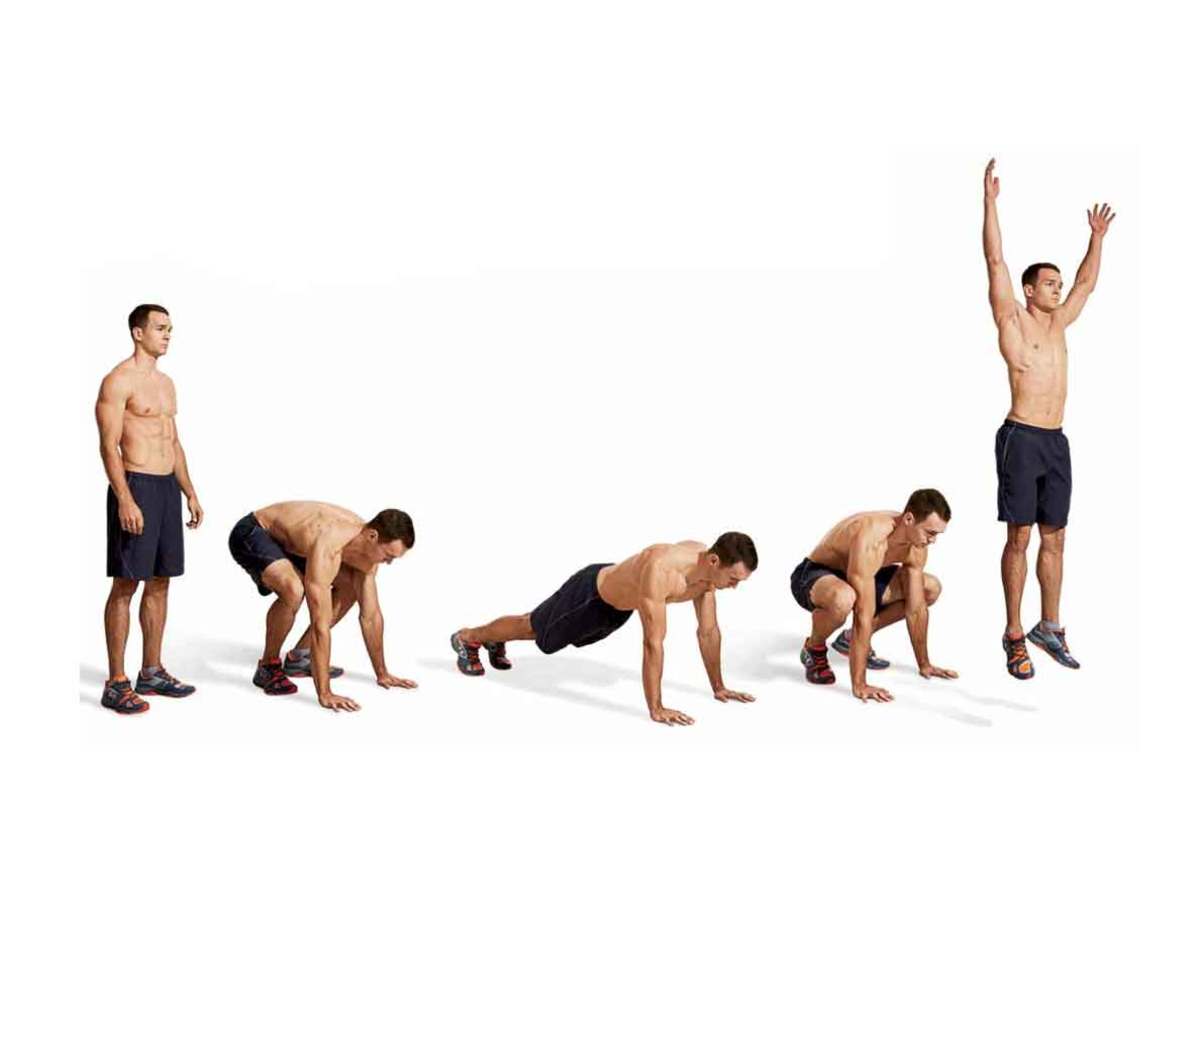 Workout 10: Body recomposition circuit